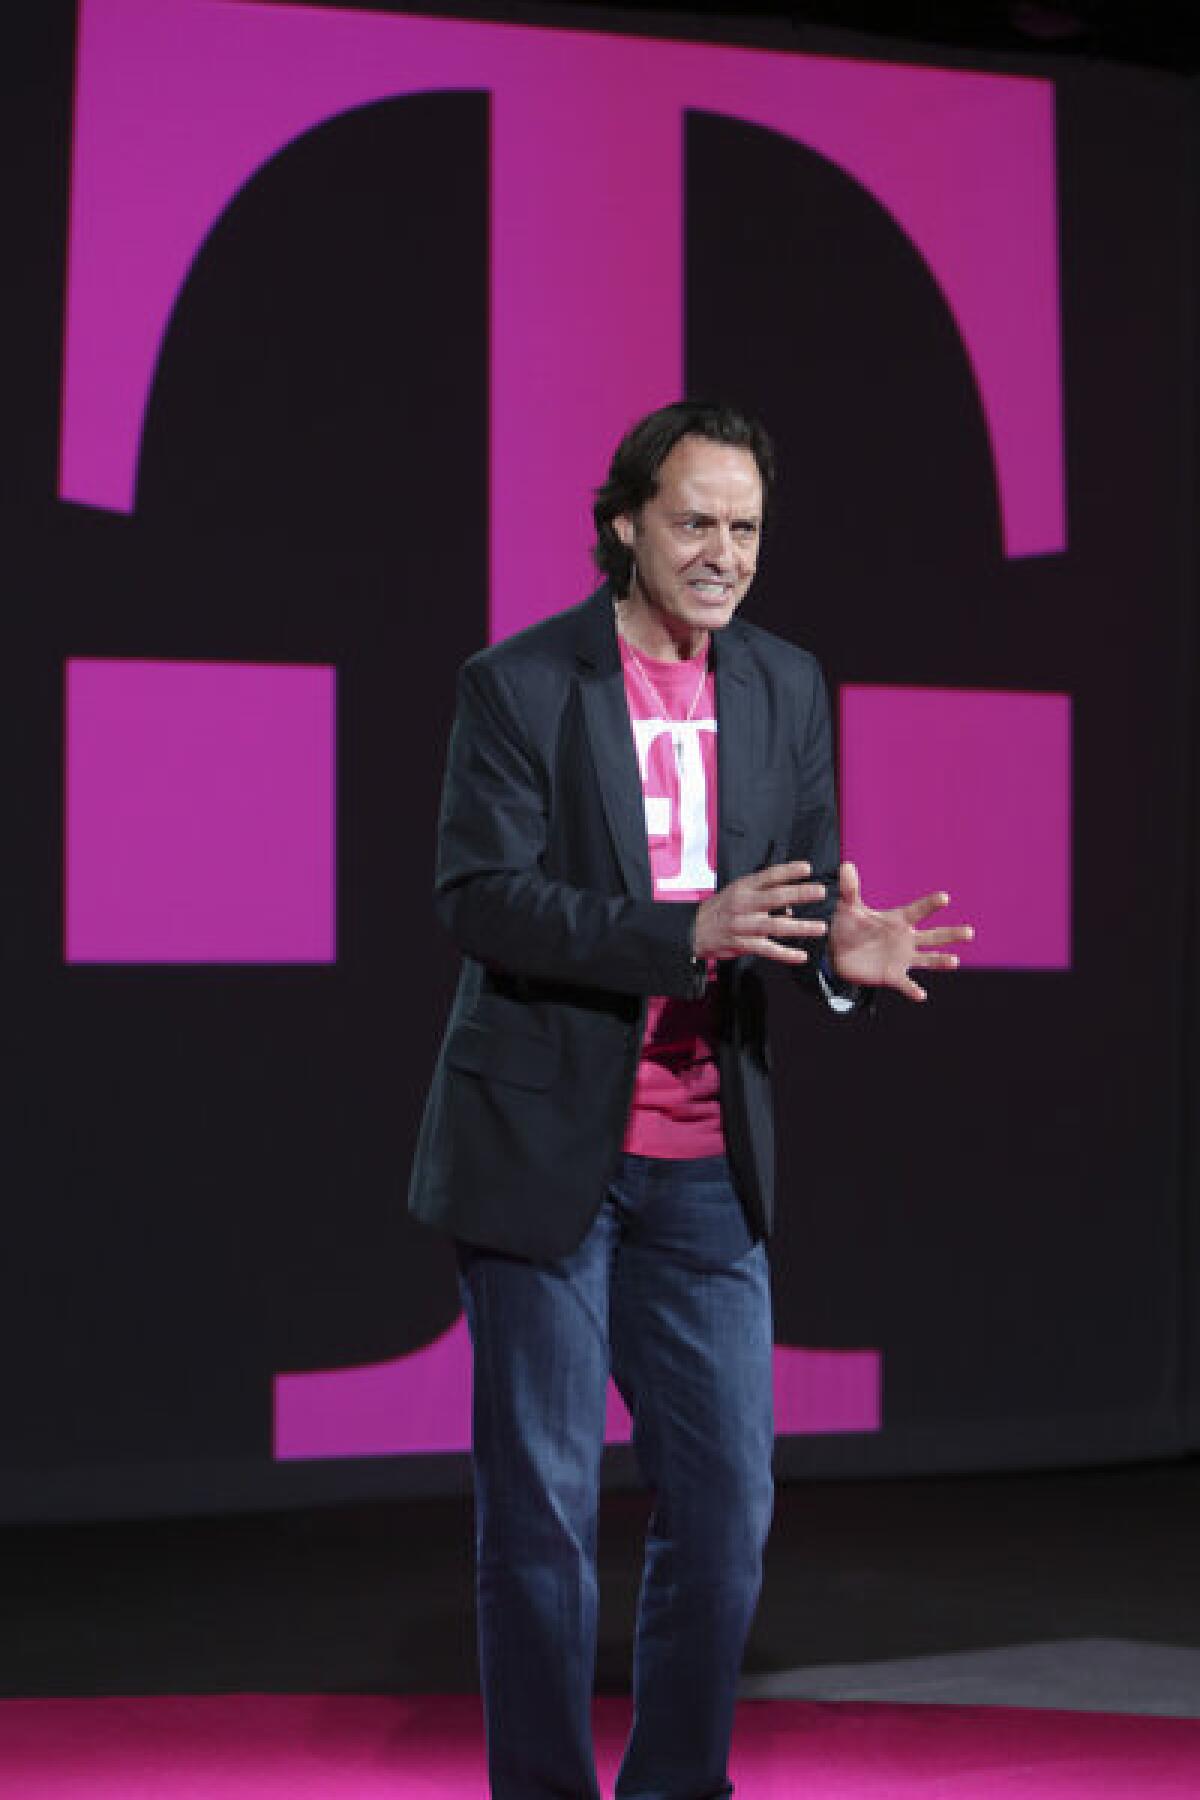 T-Mobile CEO John Legere gestures as he speaks during a news conference in March at which T-Mobile announced it would start selling the iPhone 5. Legere has been pushing T-Mobile away from industry standards.